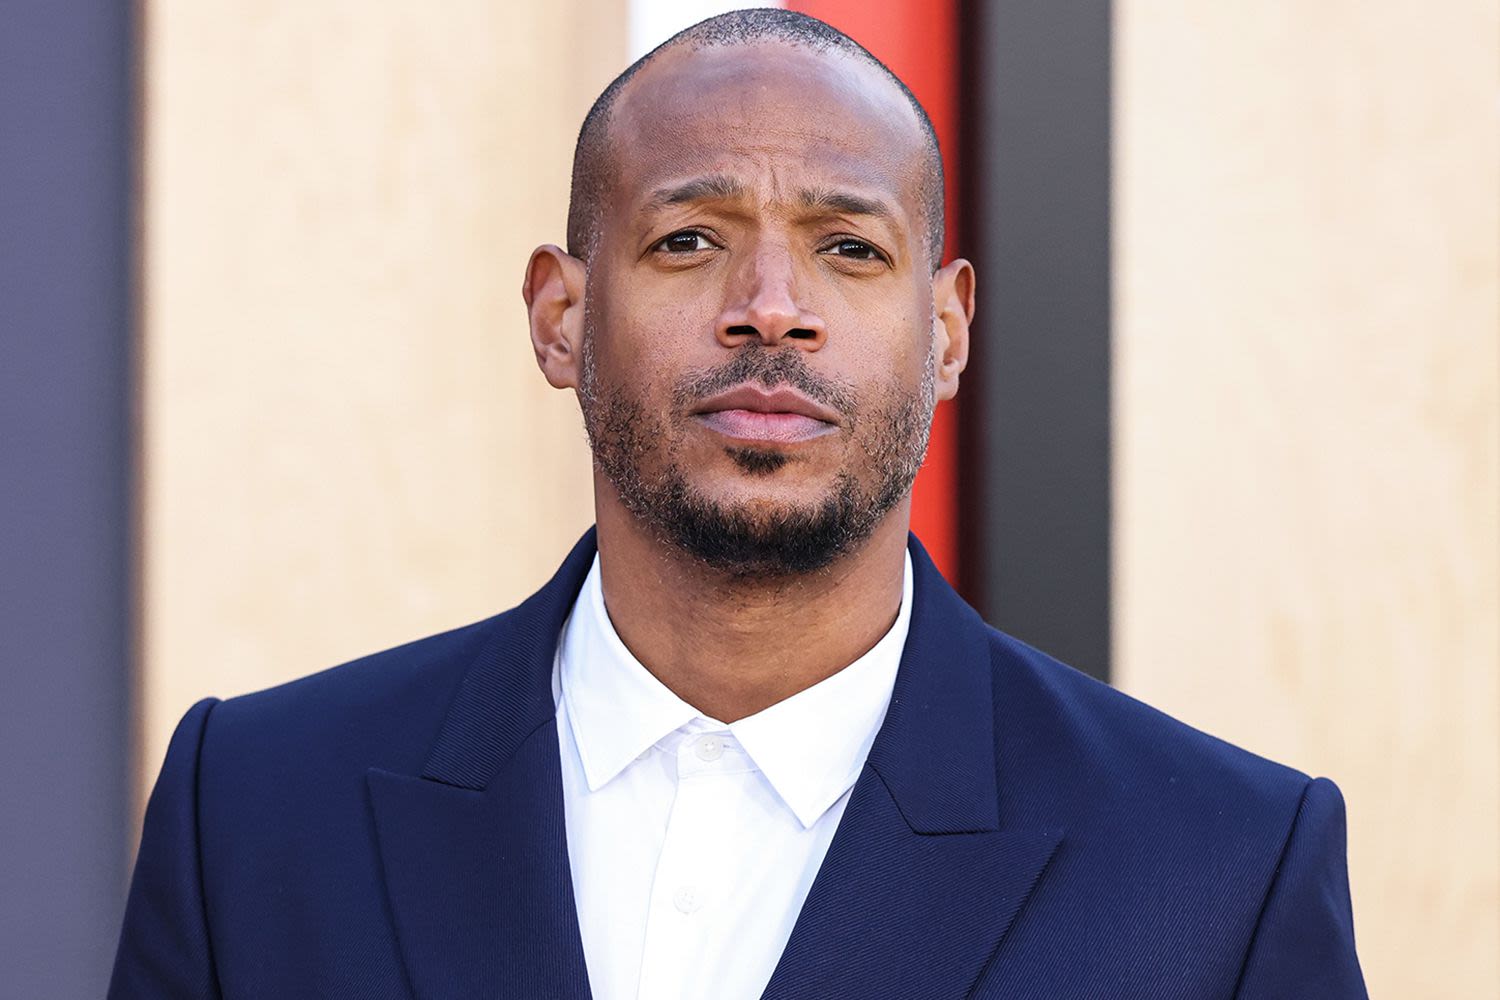 Marlon Wayans Opens Up About Losing Nearly 60 Loved Ones and His ‘Real-Life Pain’: ‘I Live Differently’